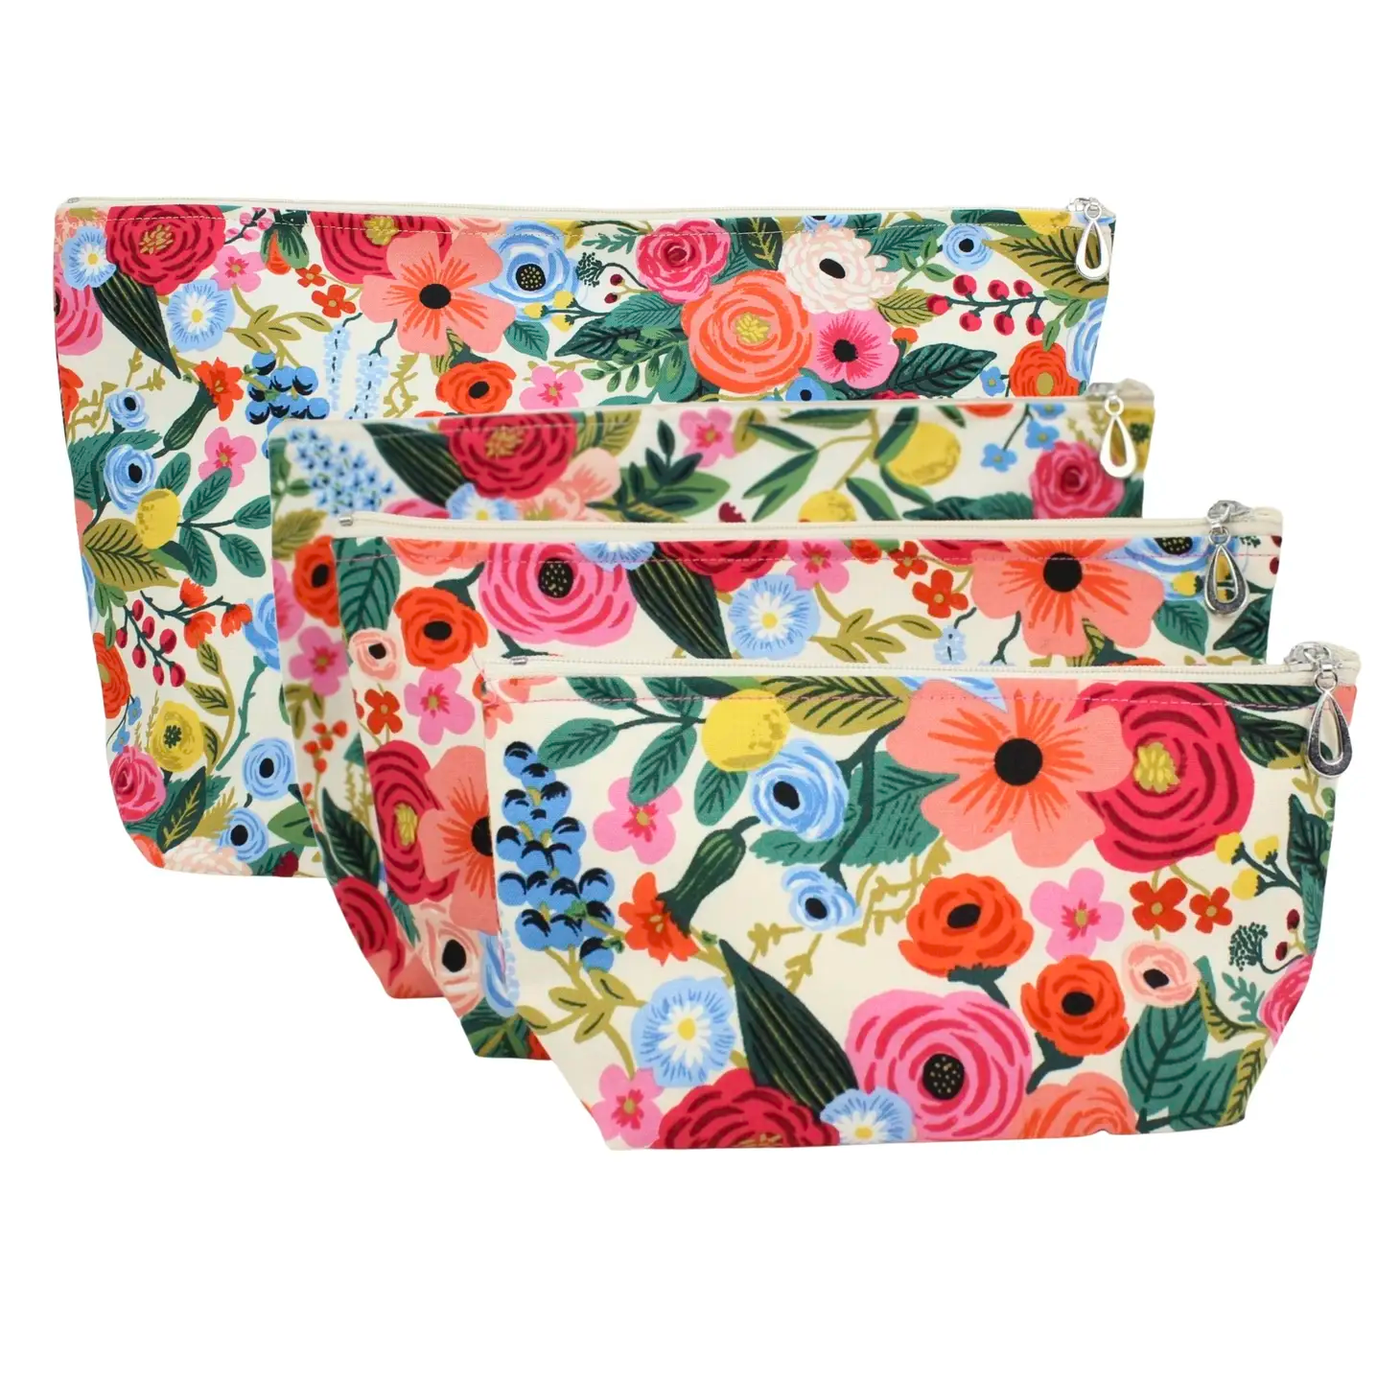 COSMETIC BAG CREAM & PINK FLORAL (Available in 3 Sizes)